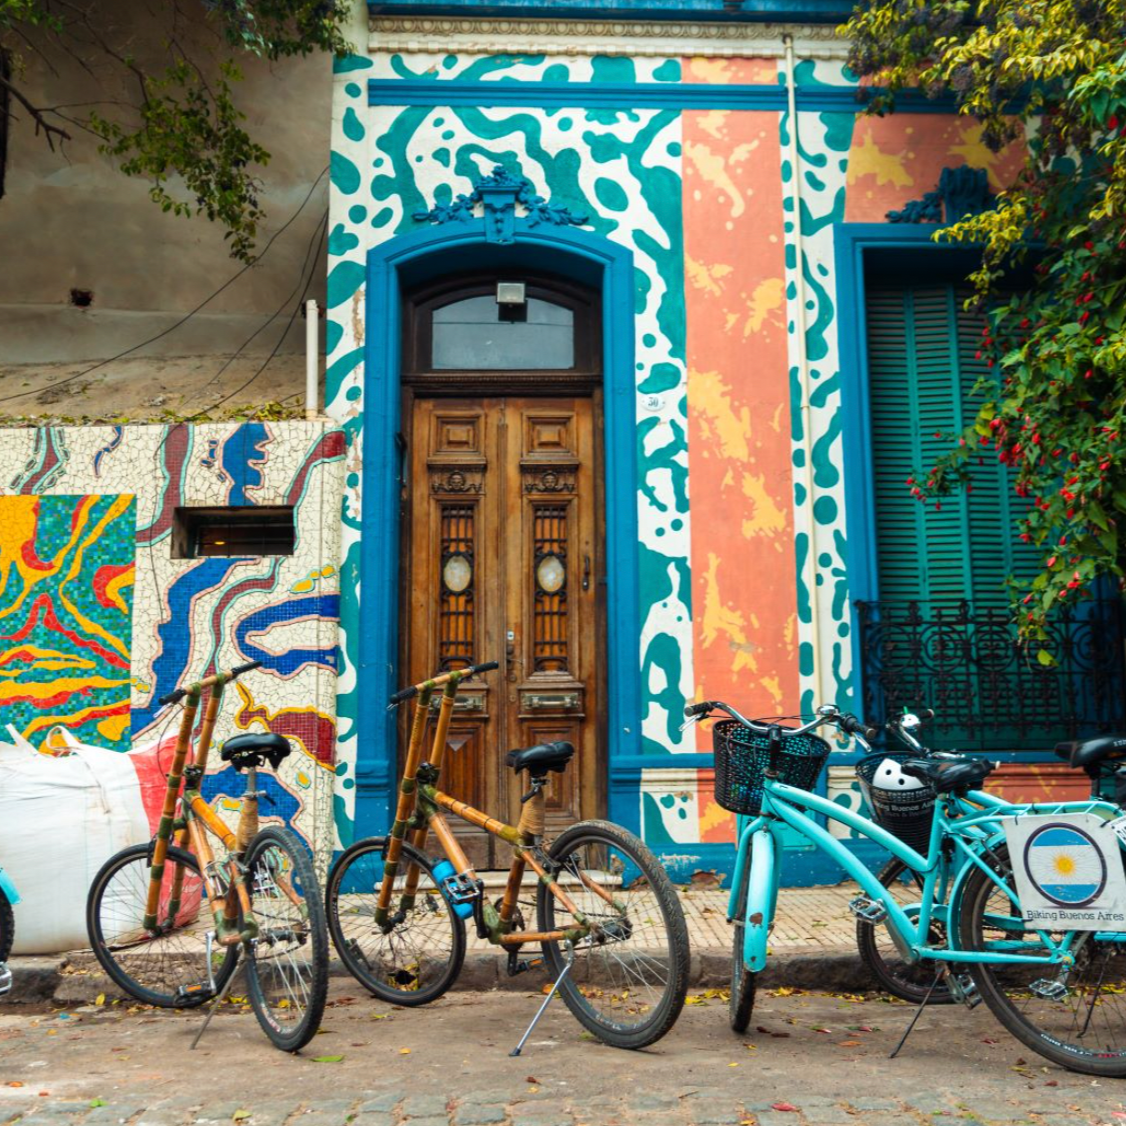 Porteño DNA Bike Tour: Discovering the City's Urban Art and Culture